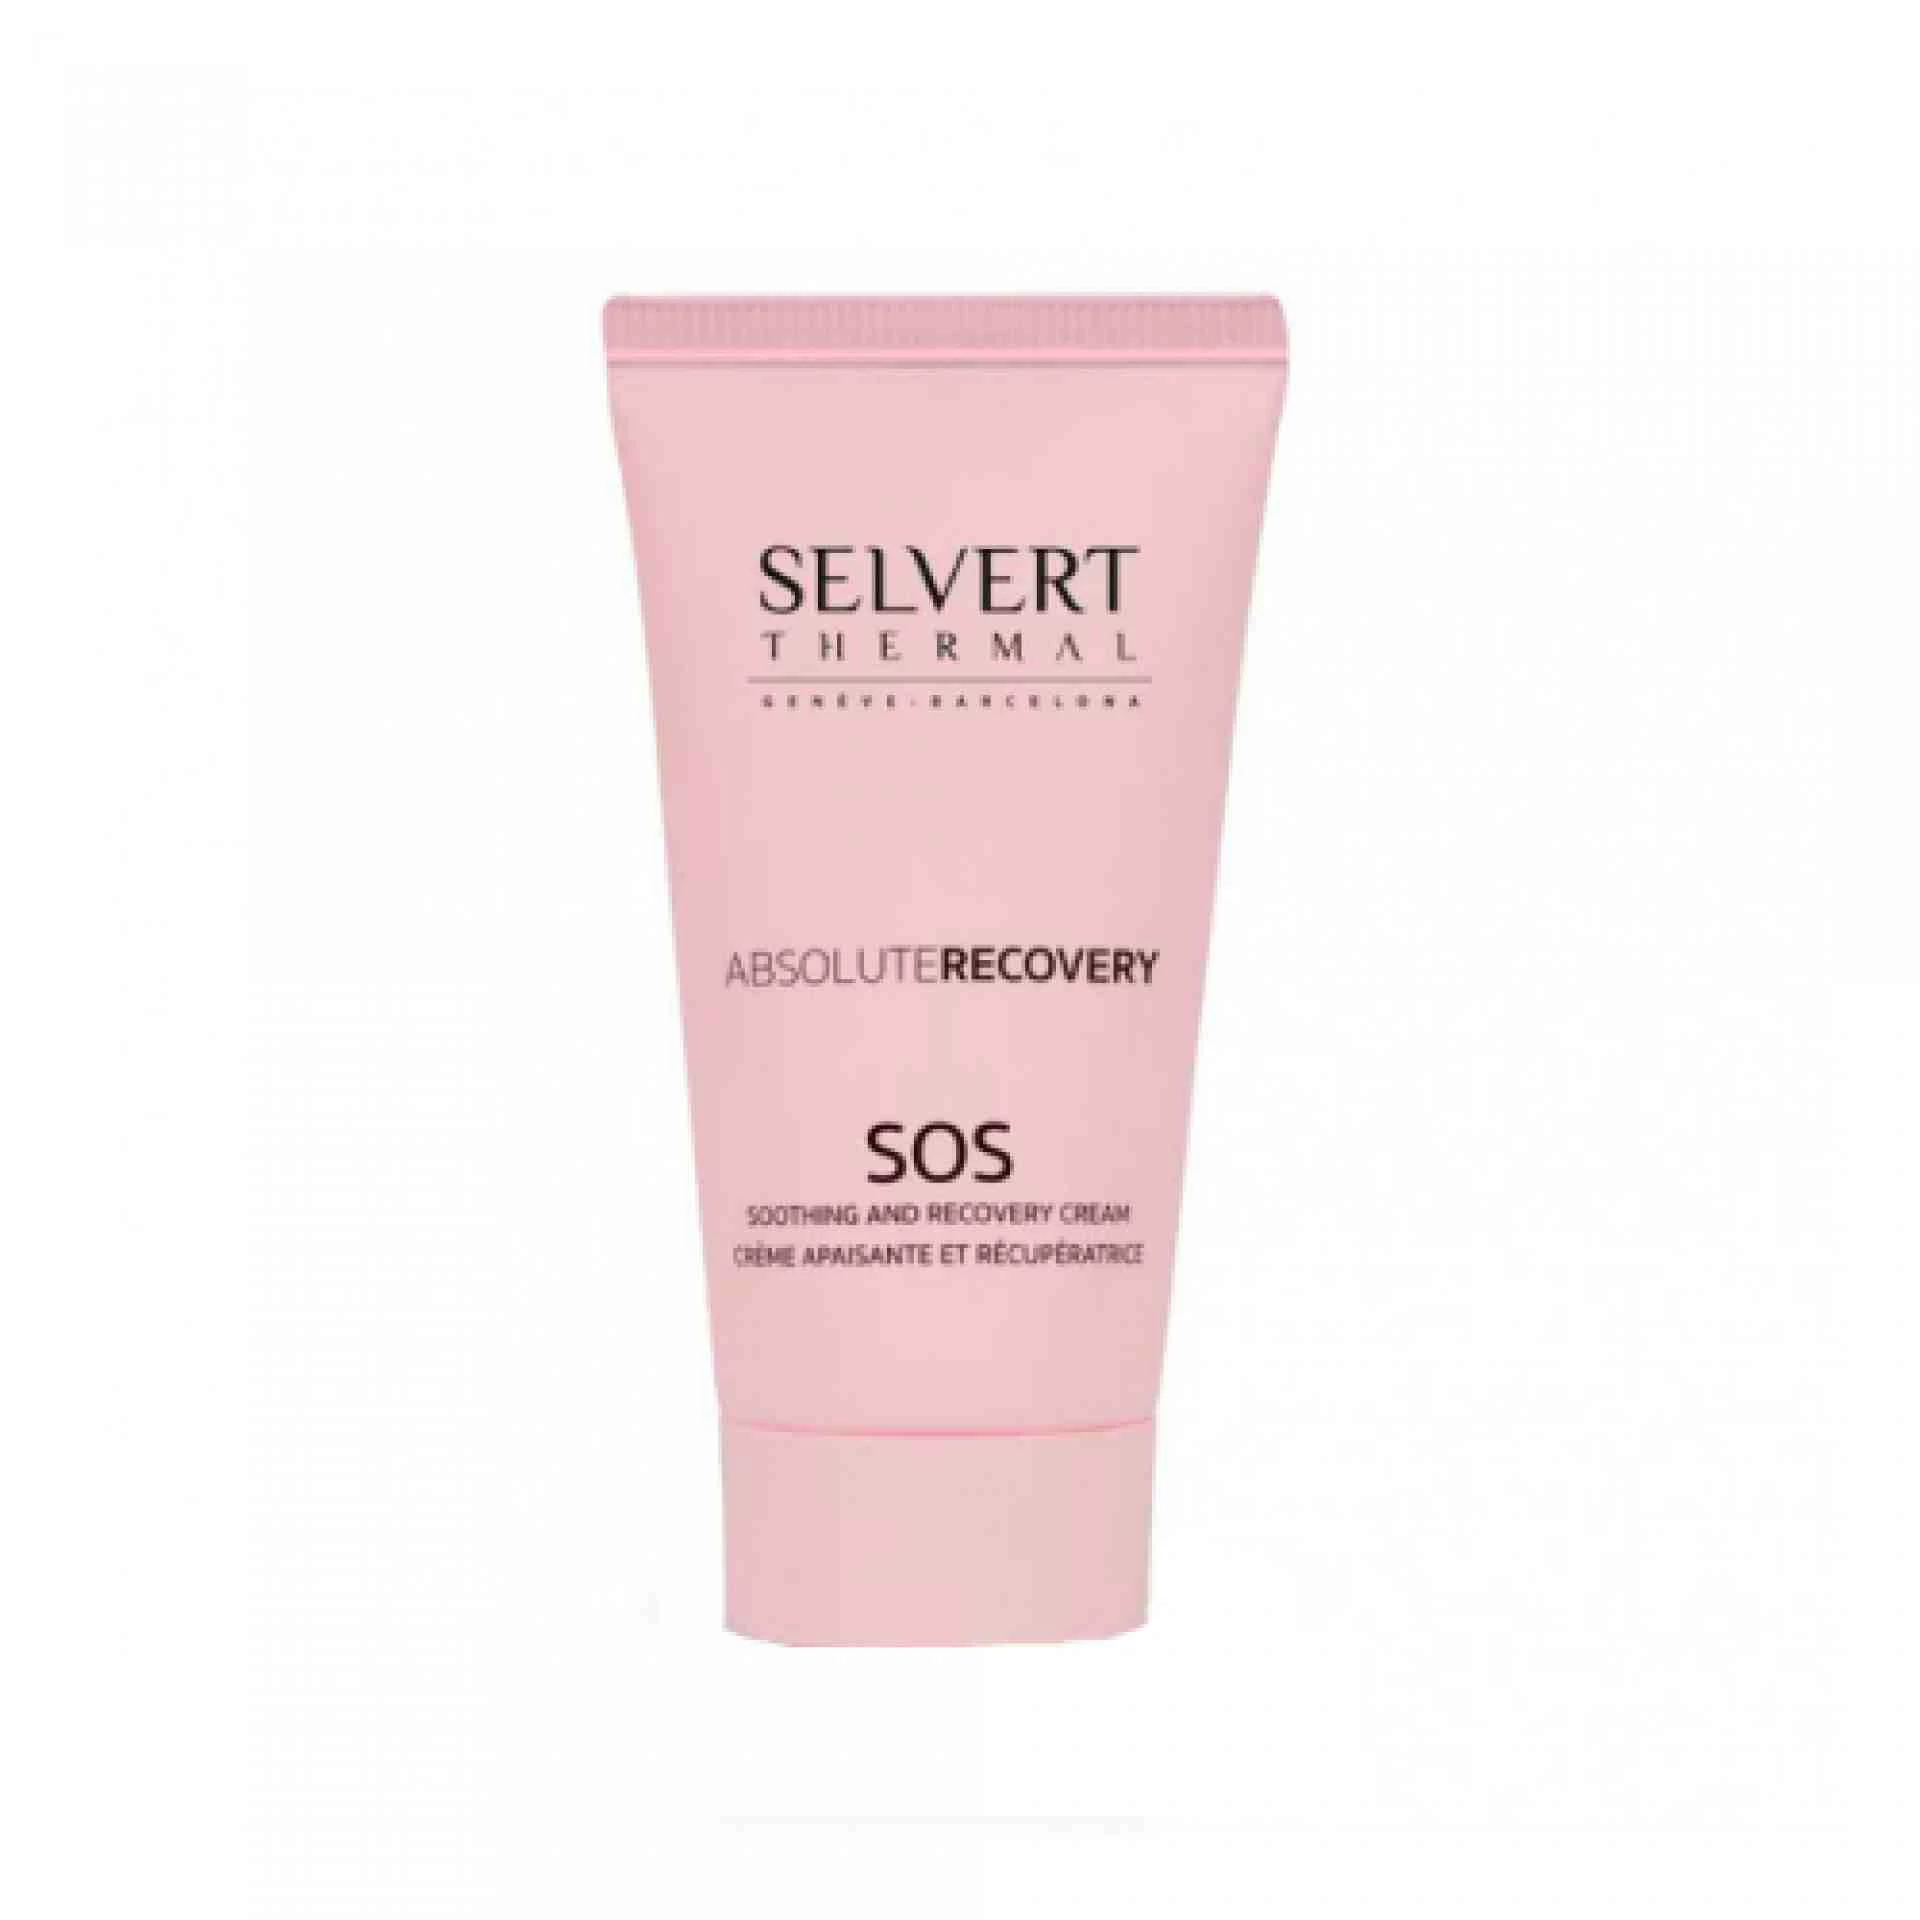 SOS SOOTHING AND RECOVERY CREAM | Crema SOS regeneradora 50 ml - Absolute Recovery - Selvert Thermal ®